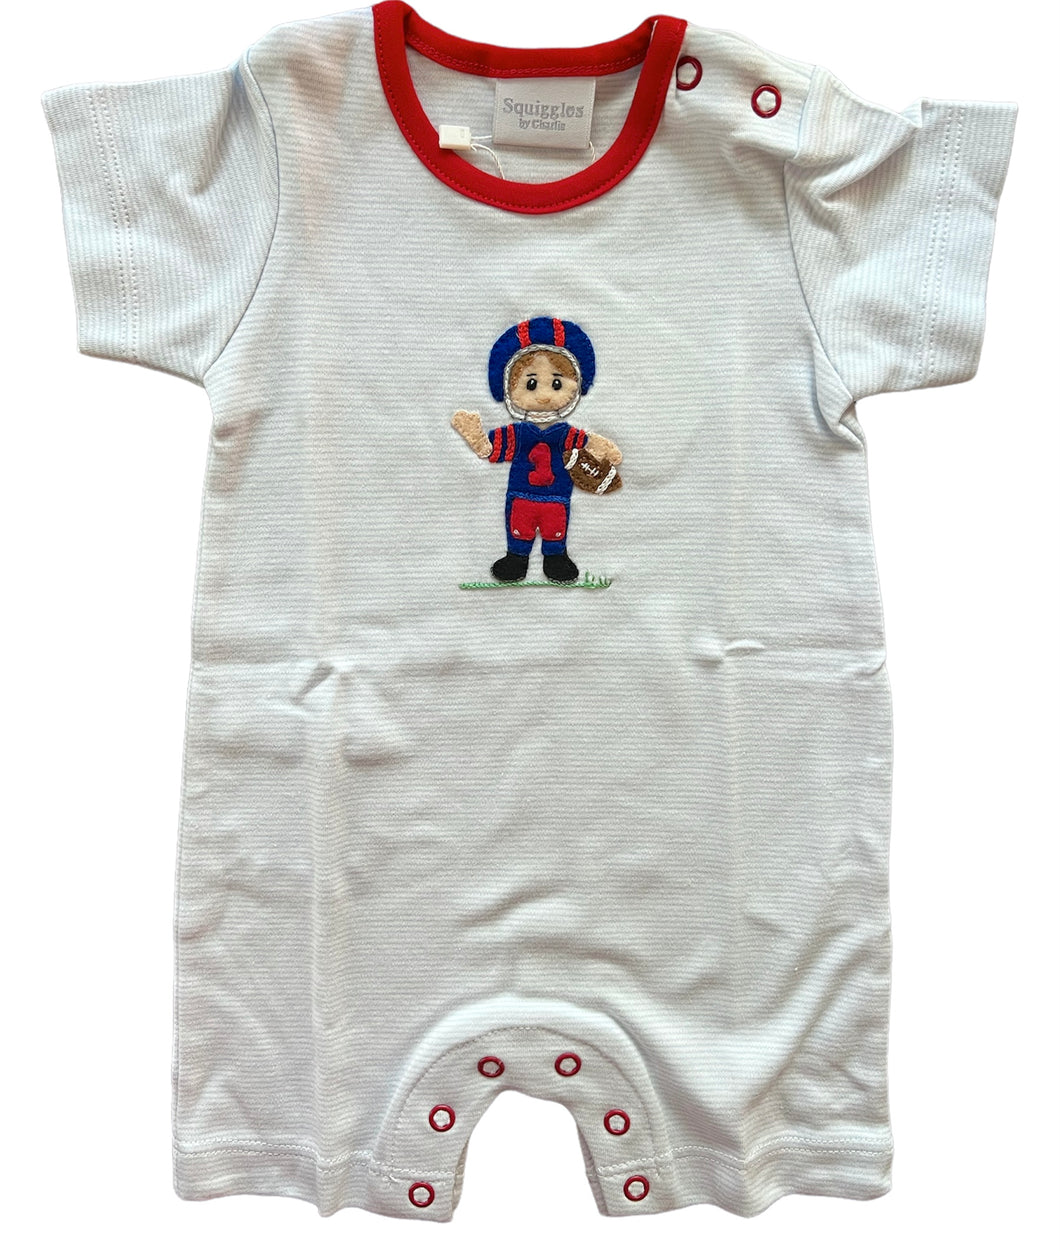 Powder Blue & Red Football Player Romper by Squiggles